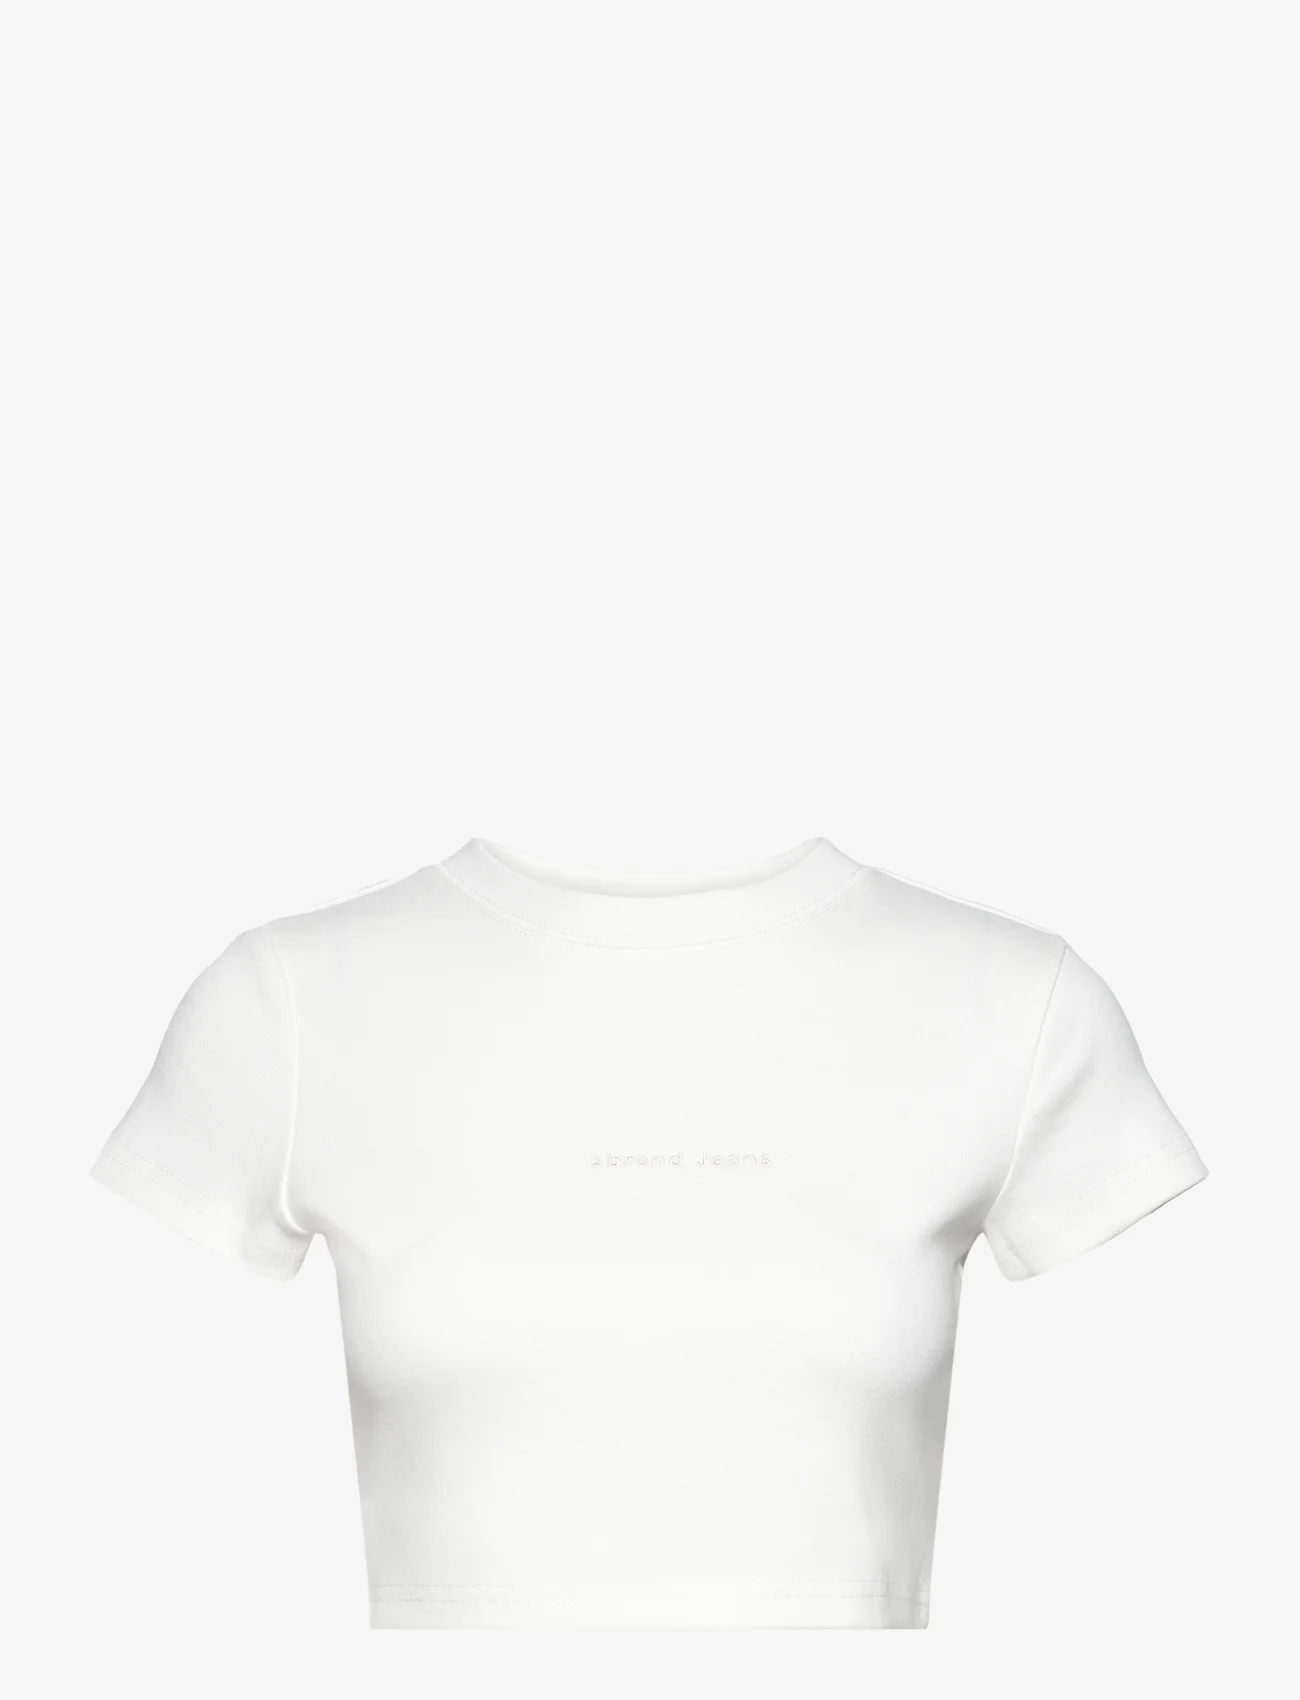 ABRAND - A 90S CROP TEE - lowest prices - white - 0